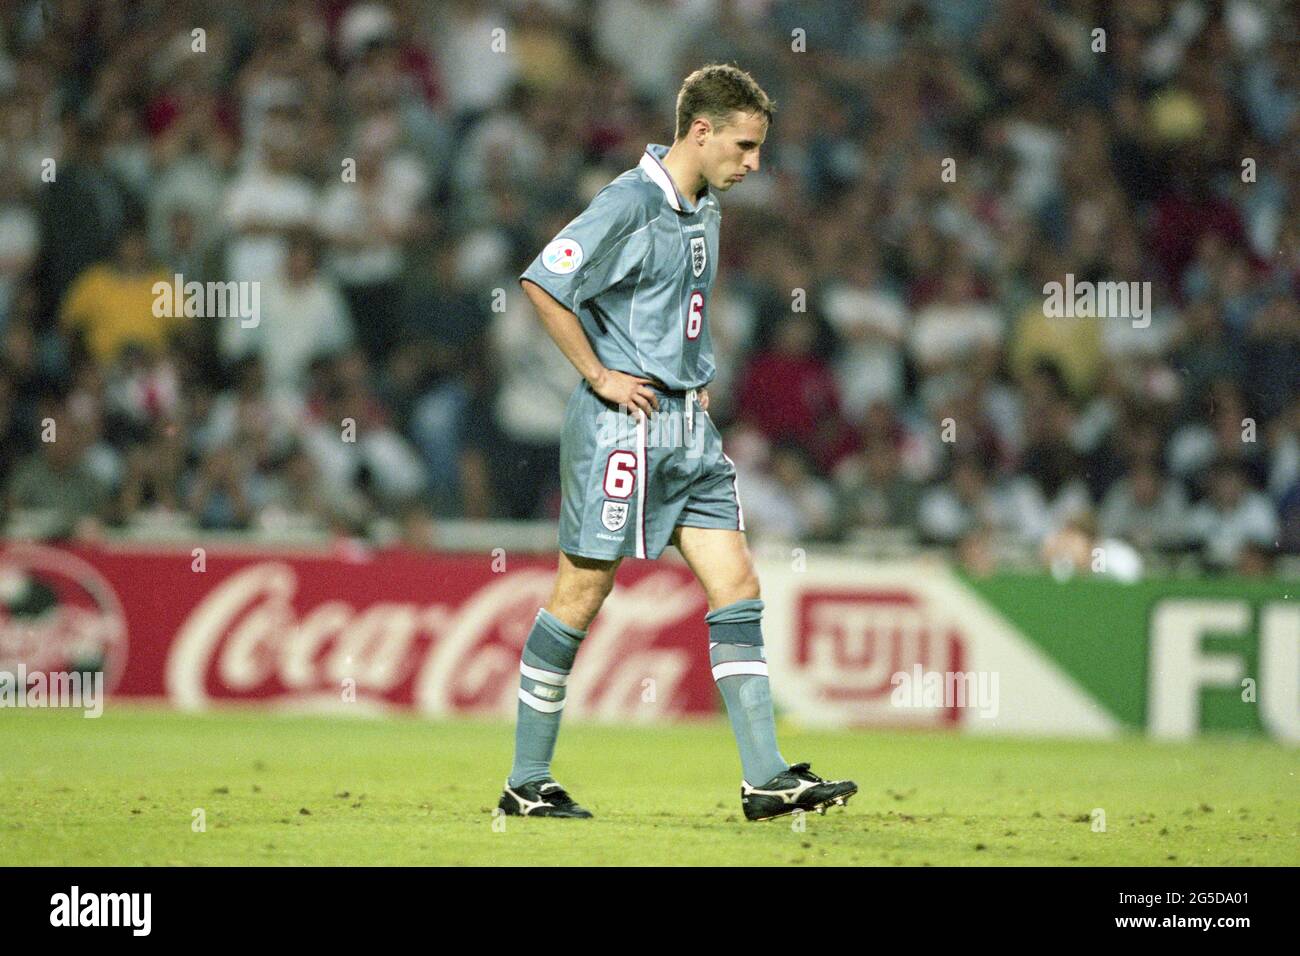 Soccer, firo: 26.06.1996 Soccer EM Euro European Championship 1996 semifinals, knockout phase, semi finals, archive photo, archive images Germany - England 6: 5 im, after penalty shoot-out Gareth Southgate, whole figure, disappointment, disappointed, shoots the decisive penalty Stock Photo